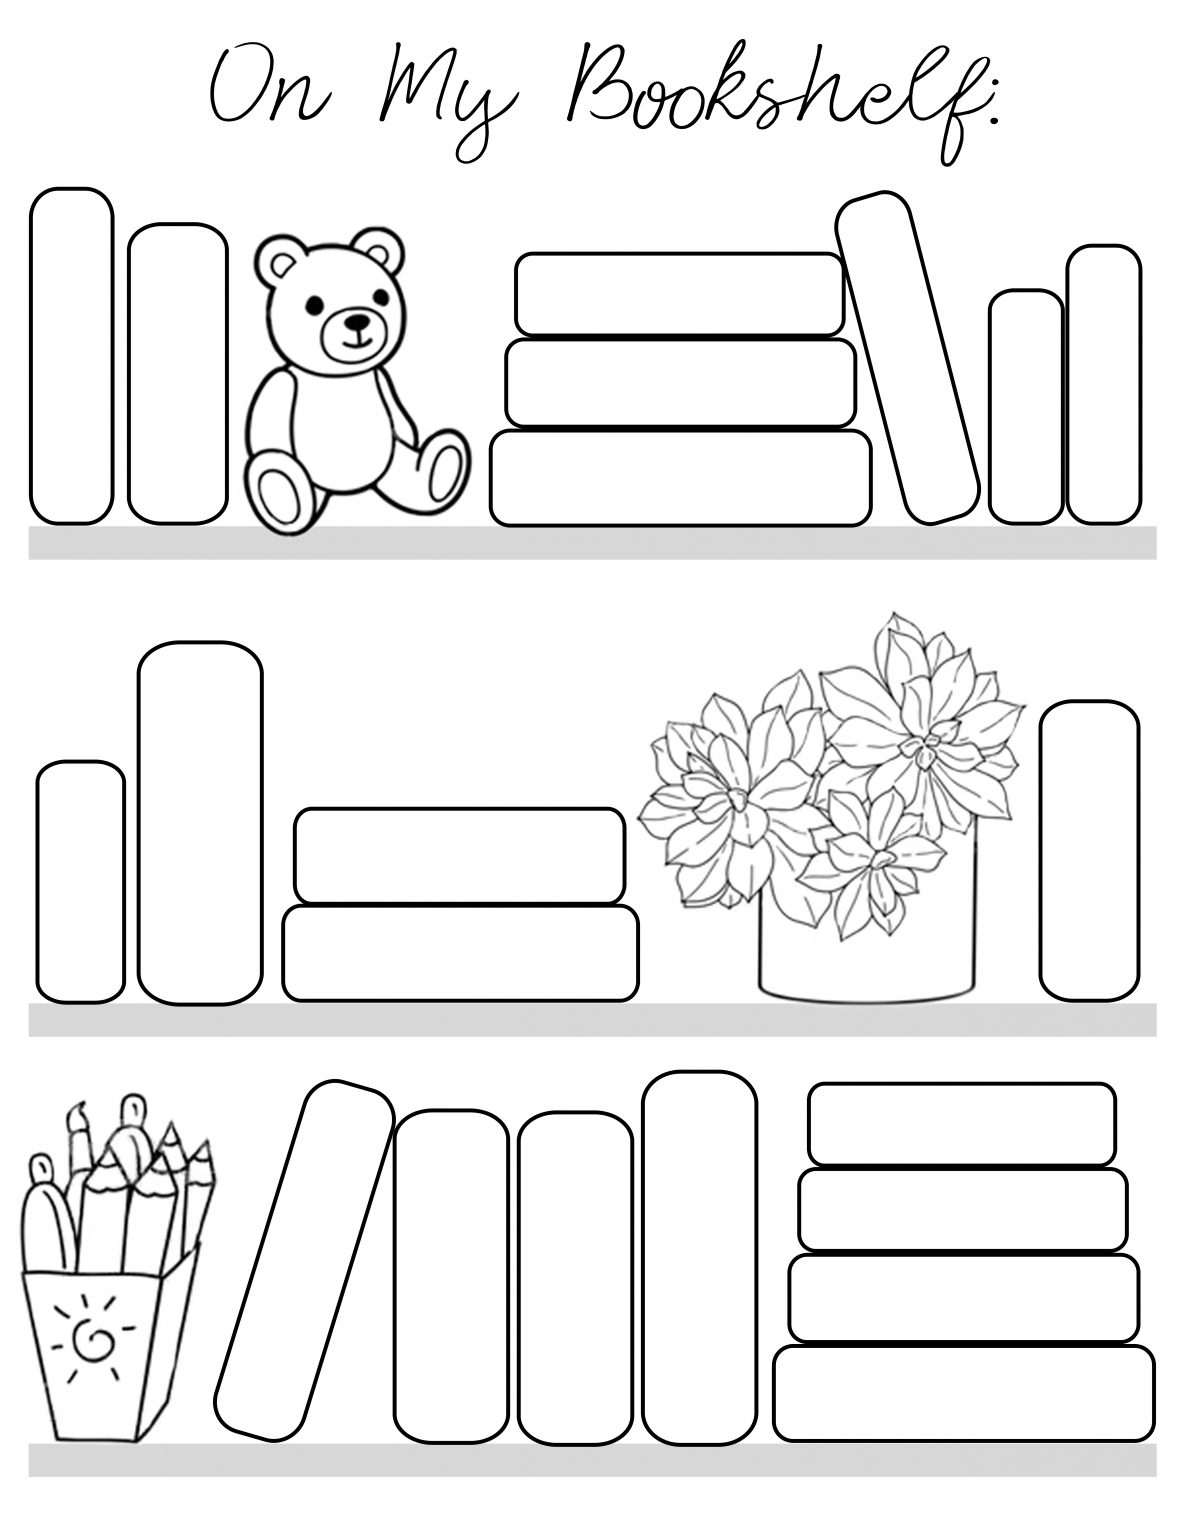 On My Bookshelf Reading Log Free Printable And Color Sheet For The